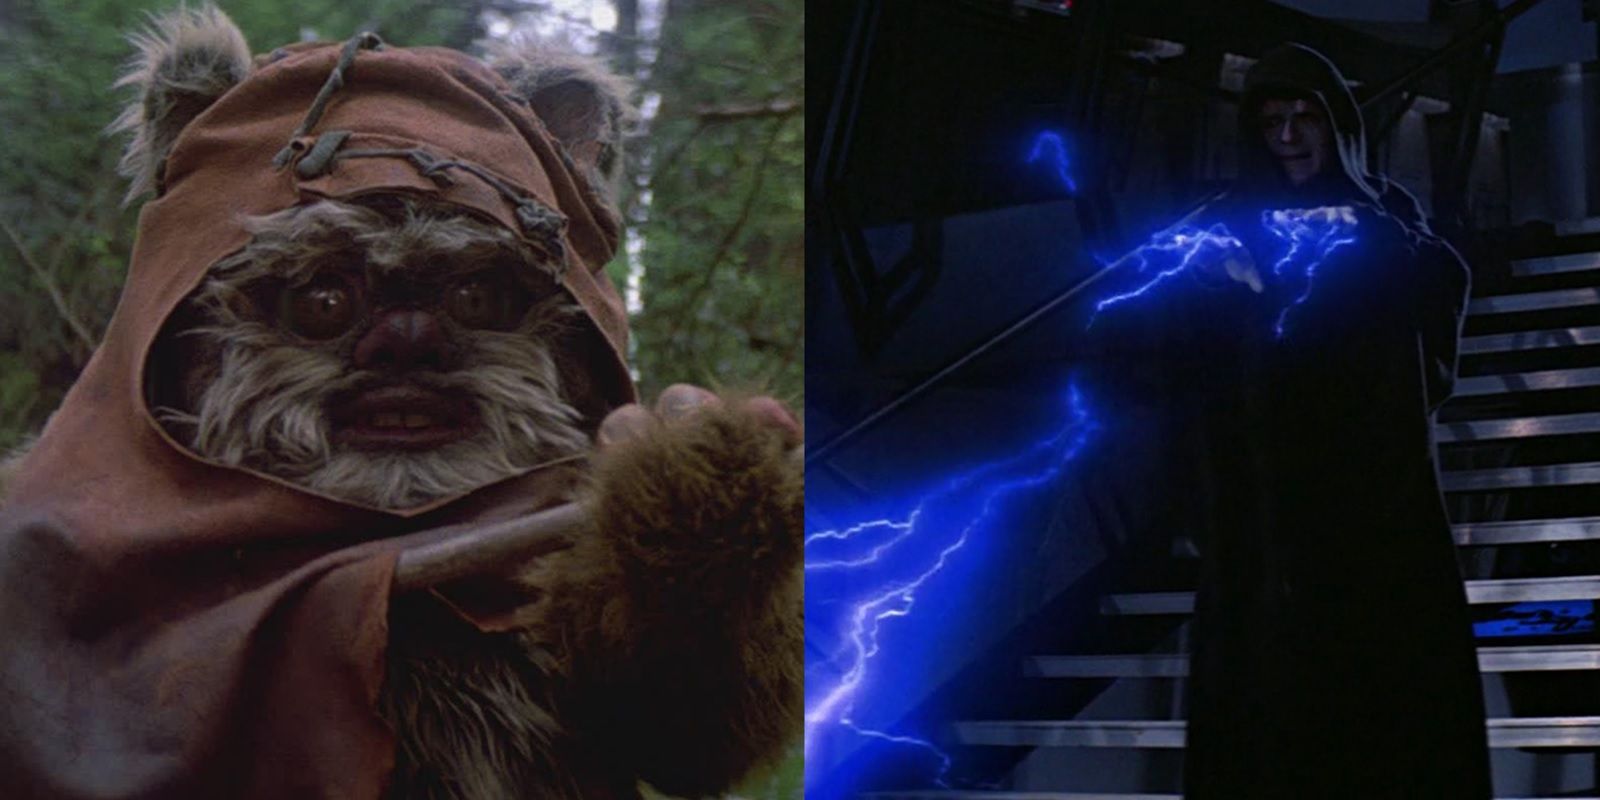 Wicket and Emperor Palpatine in Return of the Jedi